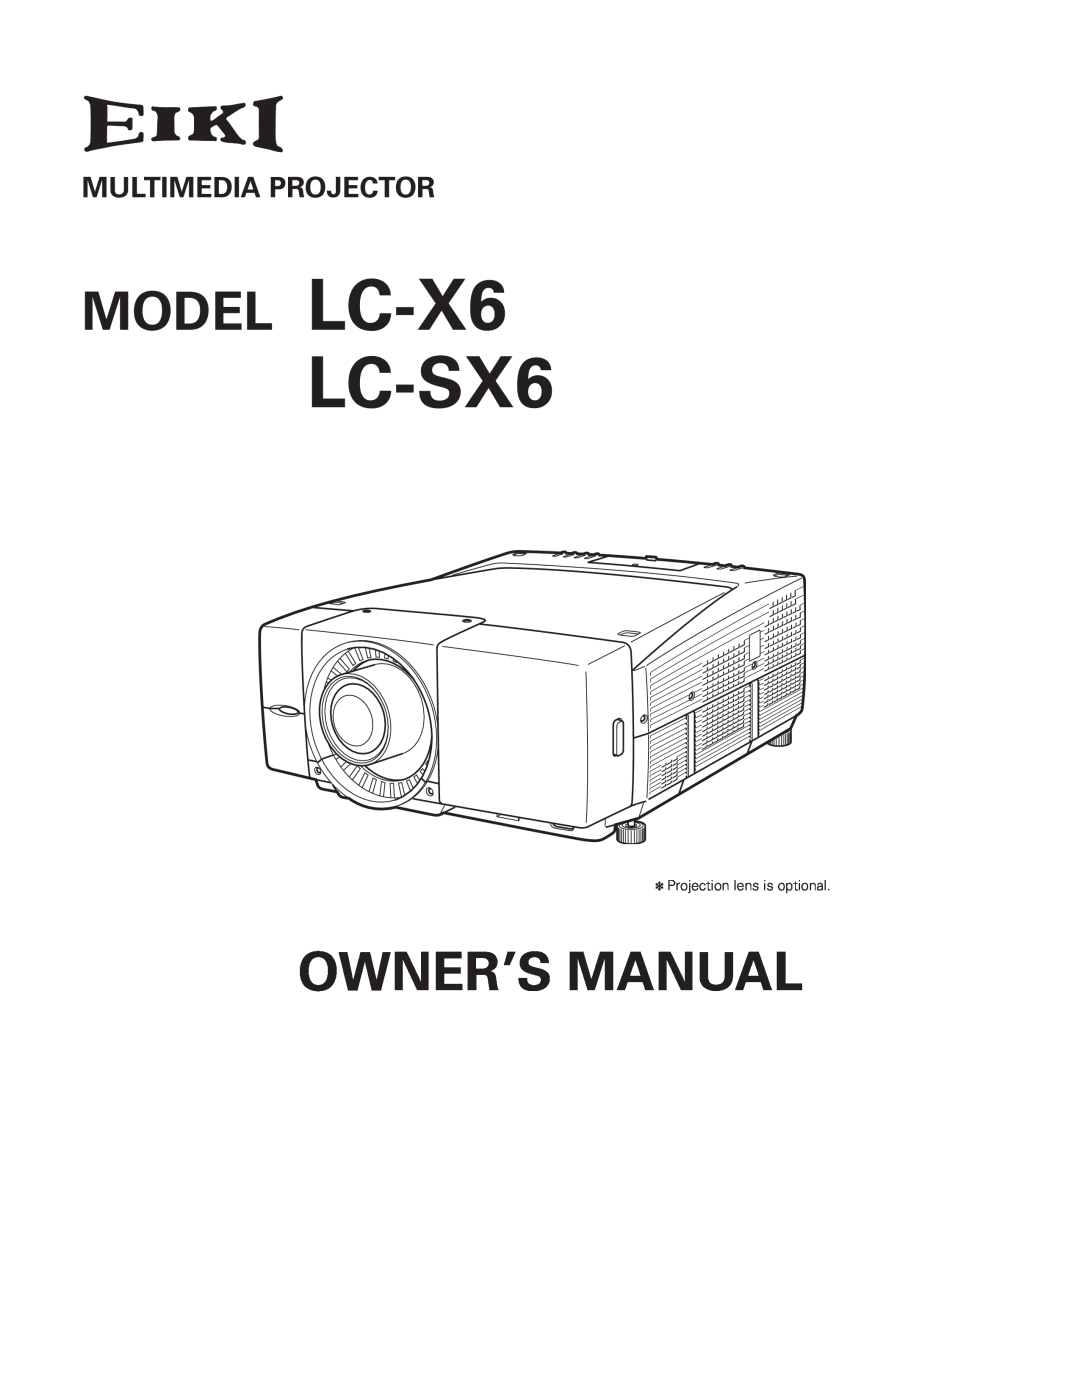 Eiki LC-SX6 owner manual Multimedia Projector, MODEL LC-X6, Owner’S Manual, Projection lens is optional 